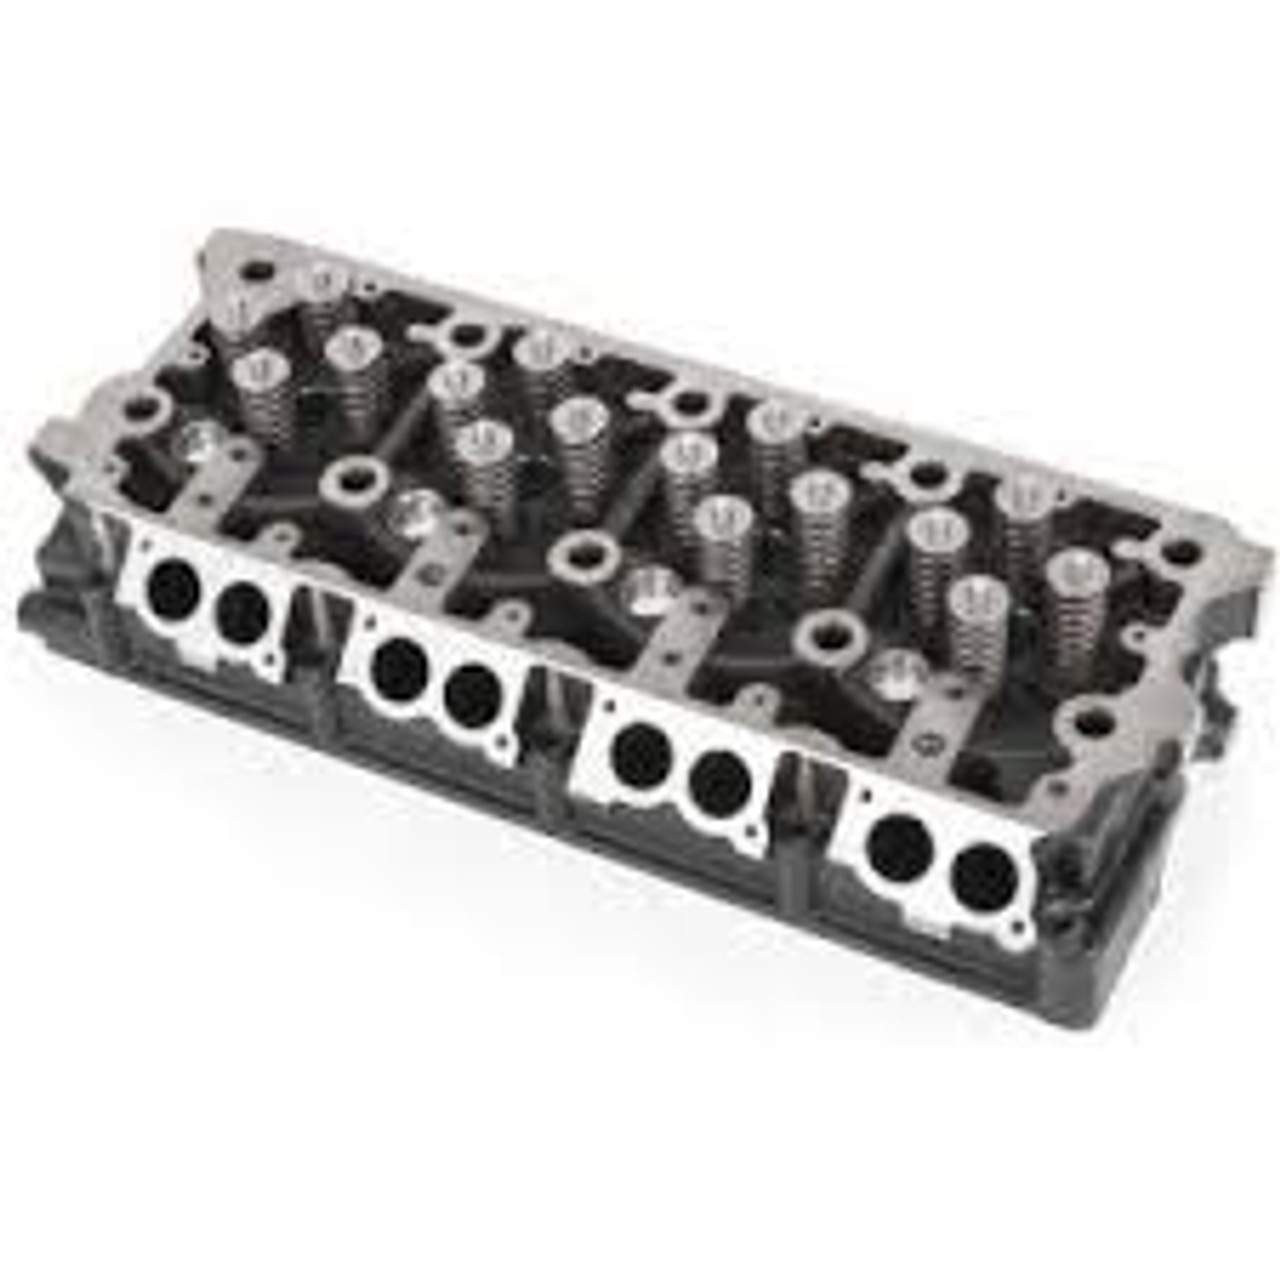 Powerstroke Products Loaded Stock 18MM Cylinder Head 2003 to 2004 6.0L Powerstroke (PP-18MMLOEM)-Main View